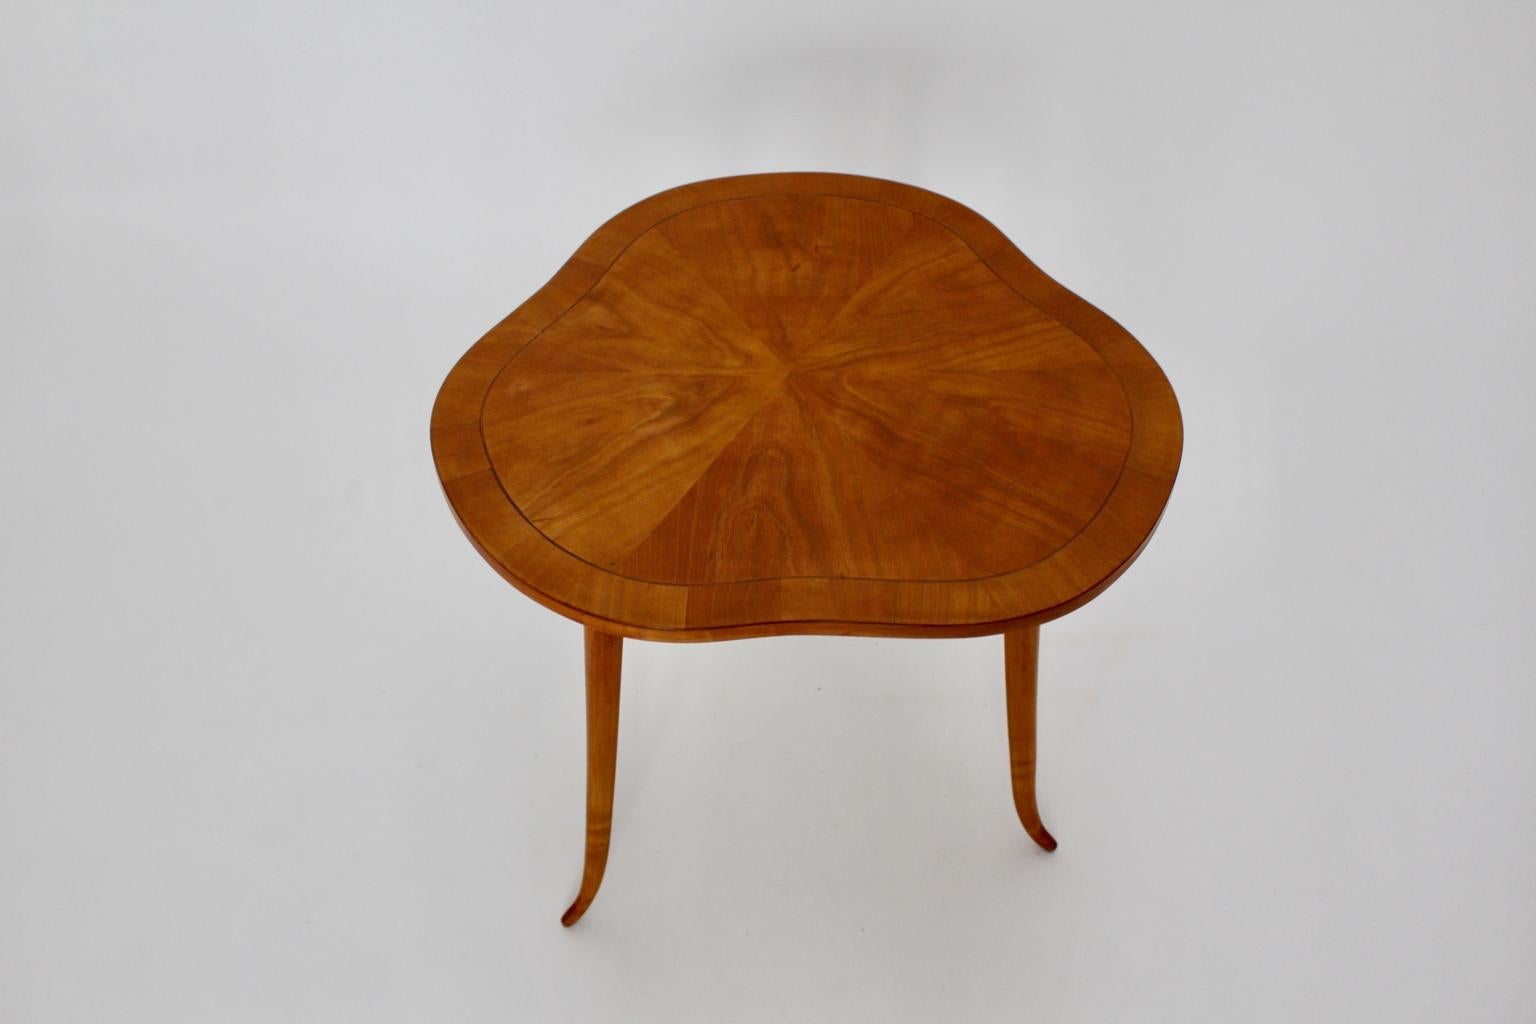 Early 20th Century Art Deco Vintage Cherry Side Table by Josef Frank for Haus and Garten Austria